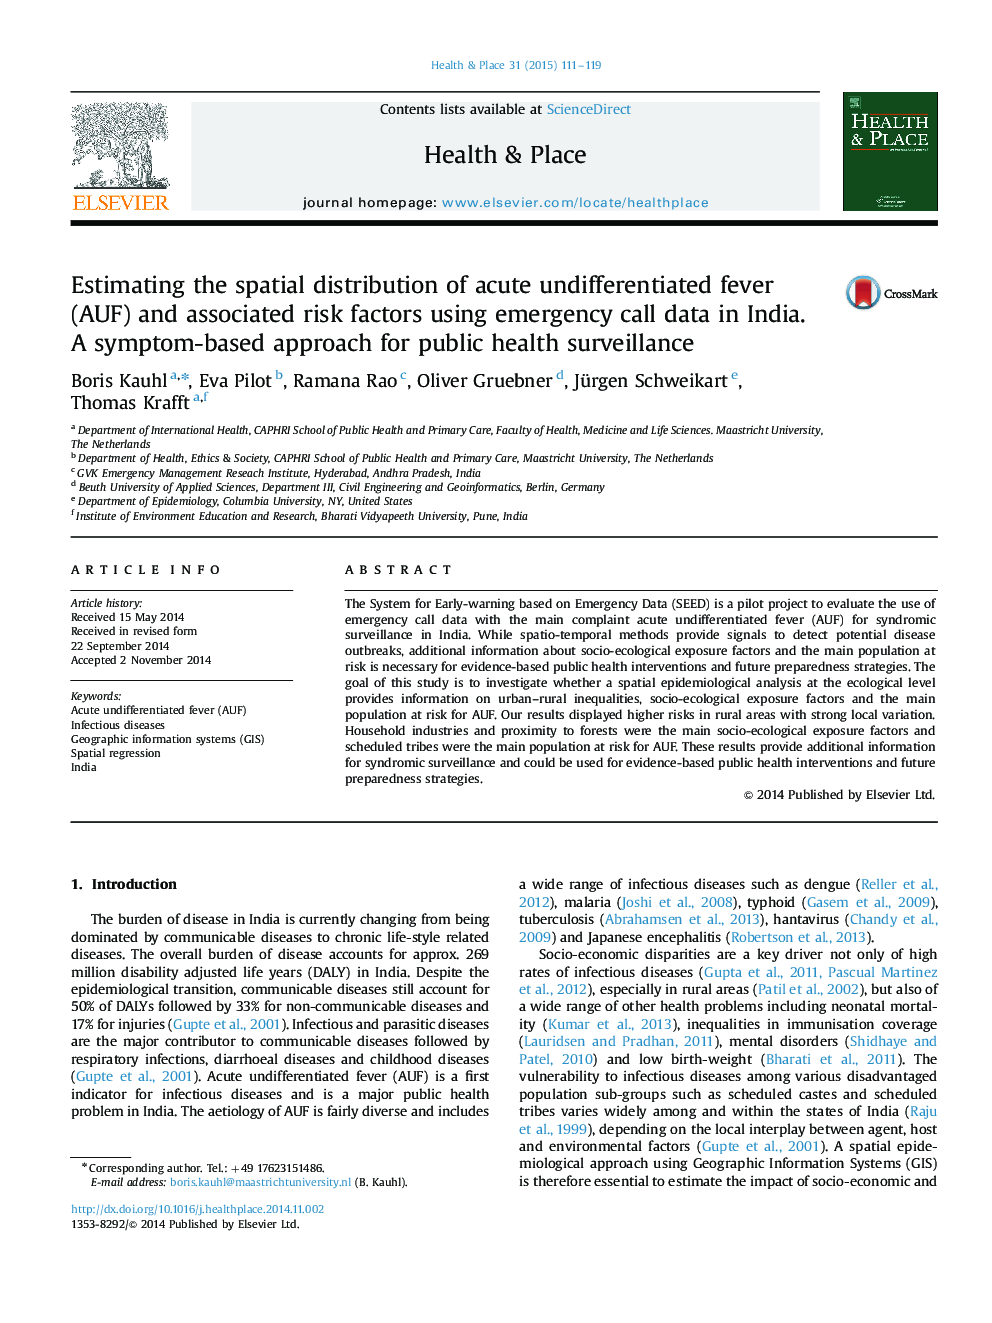 Estimating the spatial distribution of acute undifferentiated fever (AUF) and associated risk factors using emergency call data in India. A symptom-based approach for public health surveillance